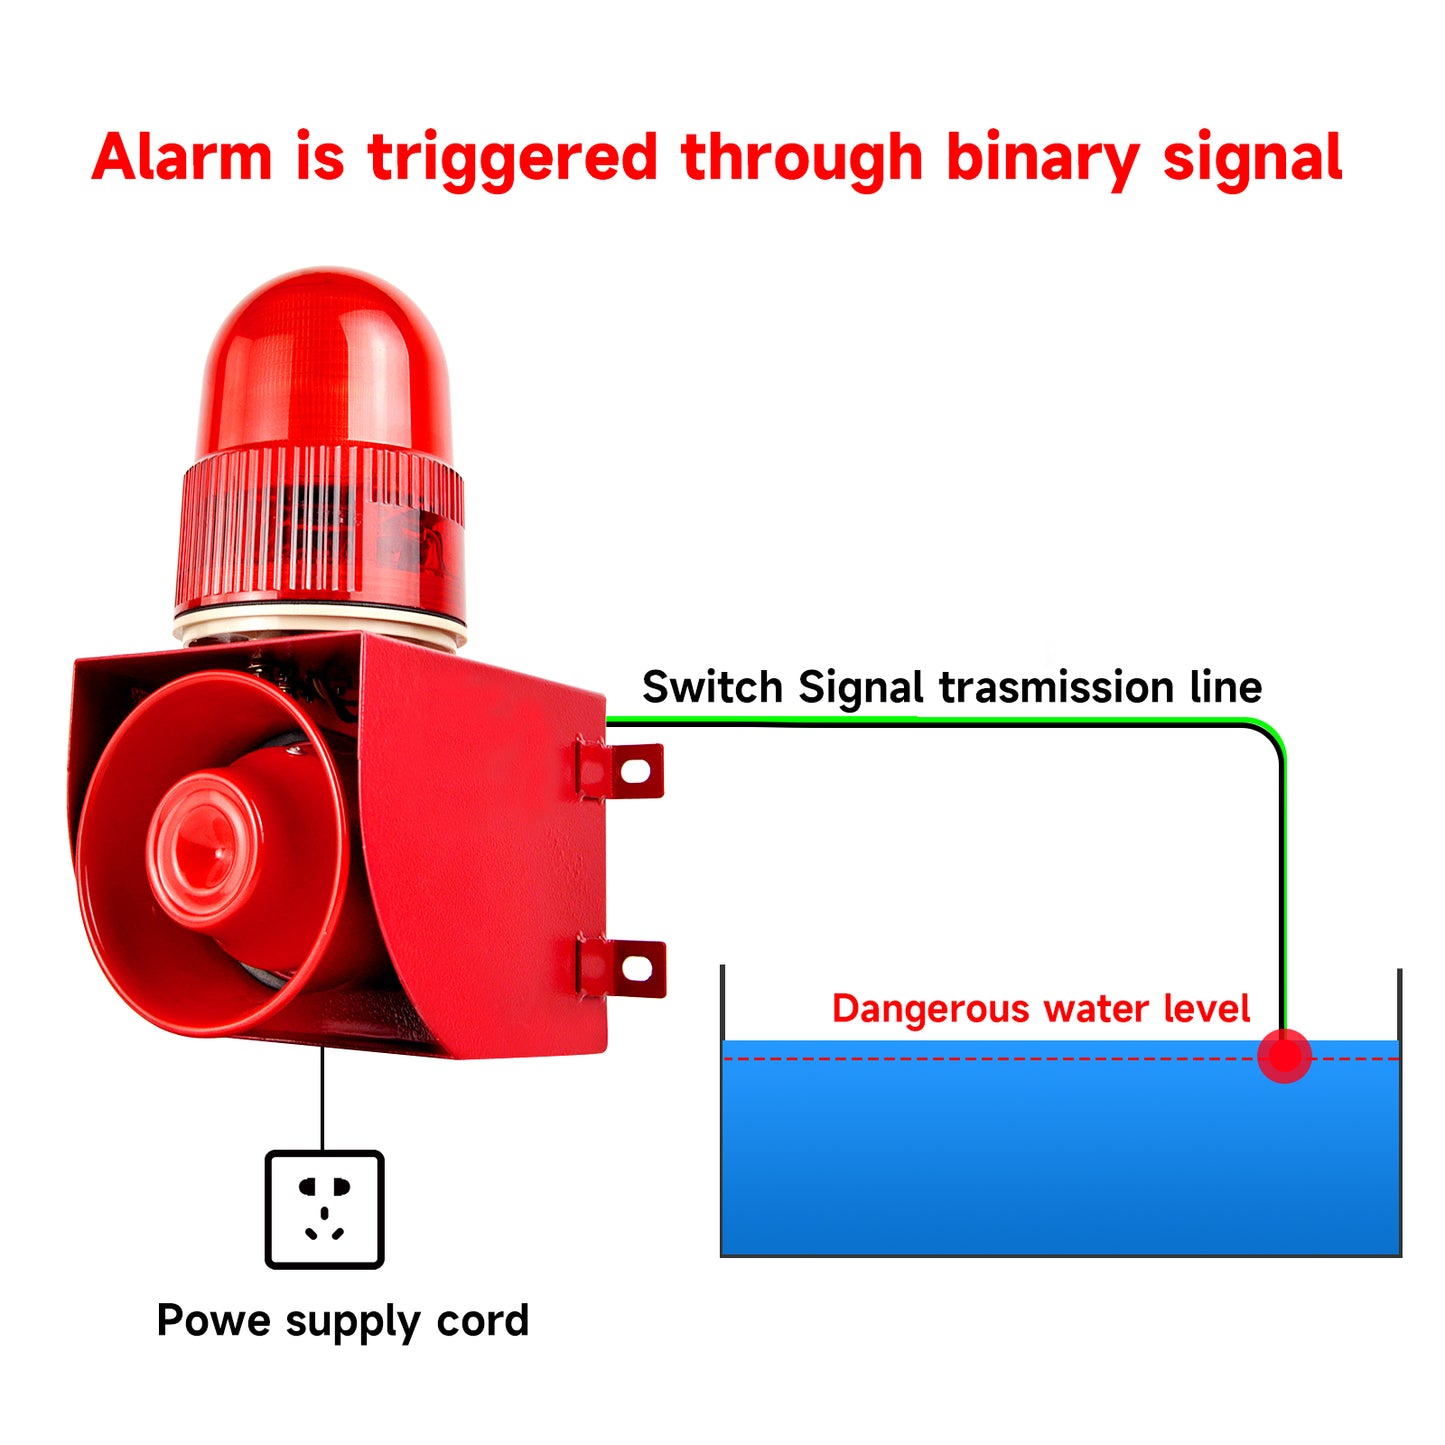 YASONG SLA-01K Security Strobe Light Siren Alarm, Switch Signal Triggered, Single Color & Single Tone Industrial Security System Alarm Kit for Security & PLC System Applications, 120dB Loud Horn 25W